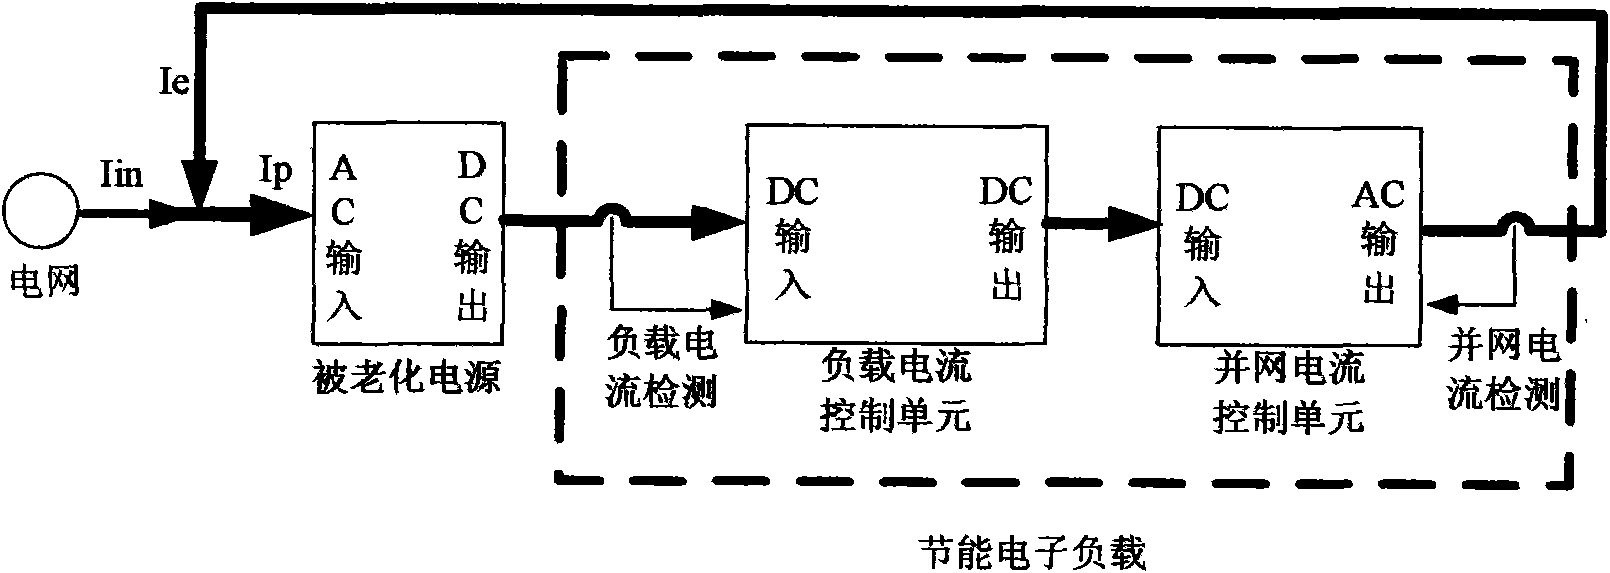 Method and system for power supply aging